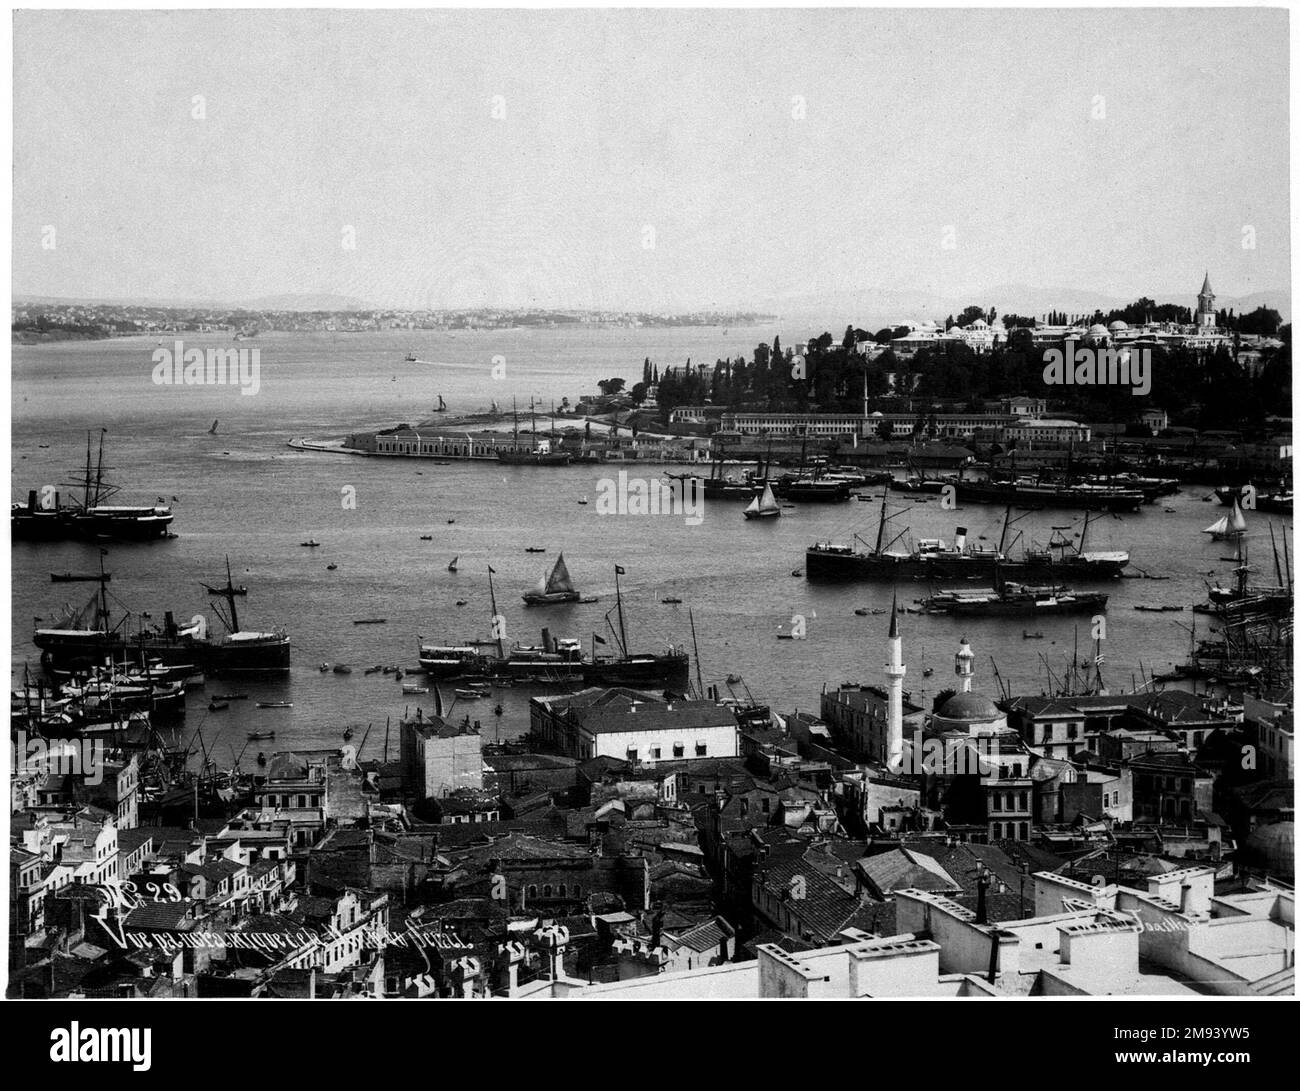 Panoramic view of the Topkapi Saray Palace (section 1) Pascal Sébah (Turkish, 1823-1886). Panoramic view of the Topkapi Saray Palace (section 1), ca. 1860-1880. Gelatin silver photograph, 12 x 10in. (30.5 x 25.4cm).   Arts of the Islamic World ca. 1860-1880 Stock Photo